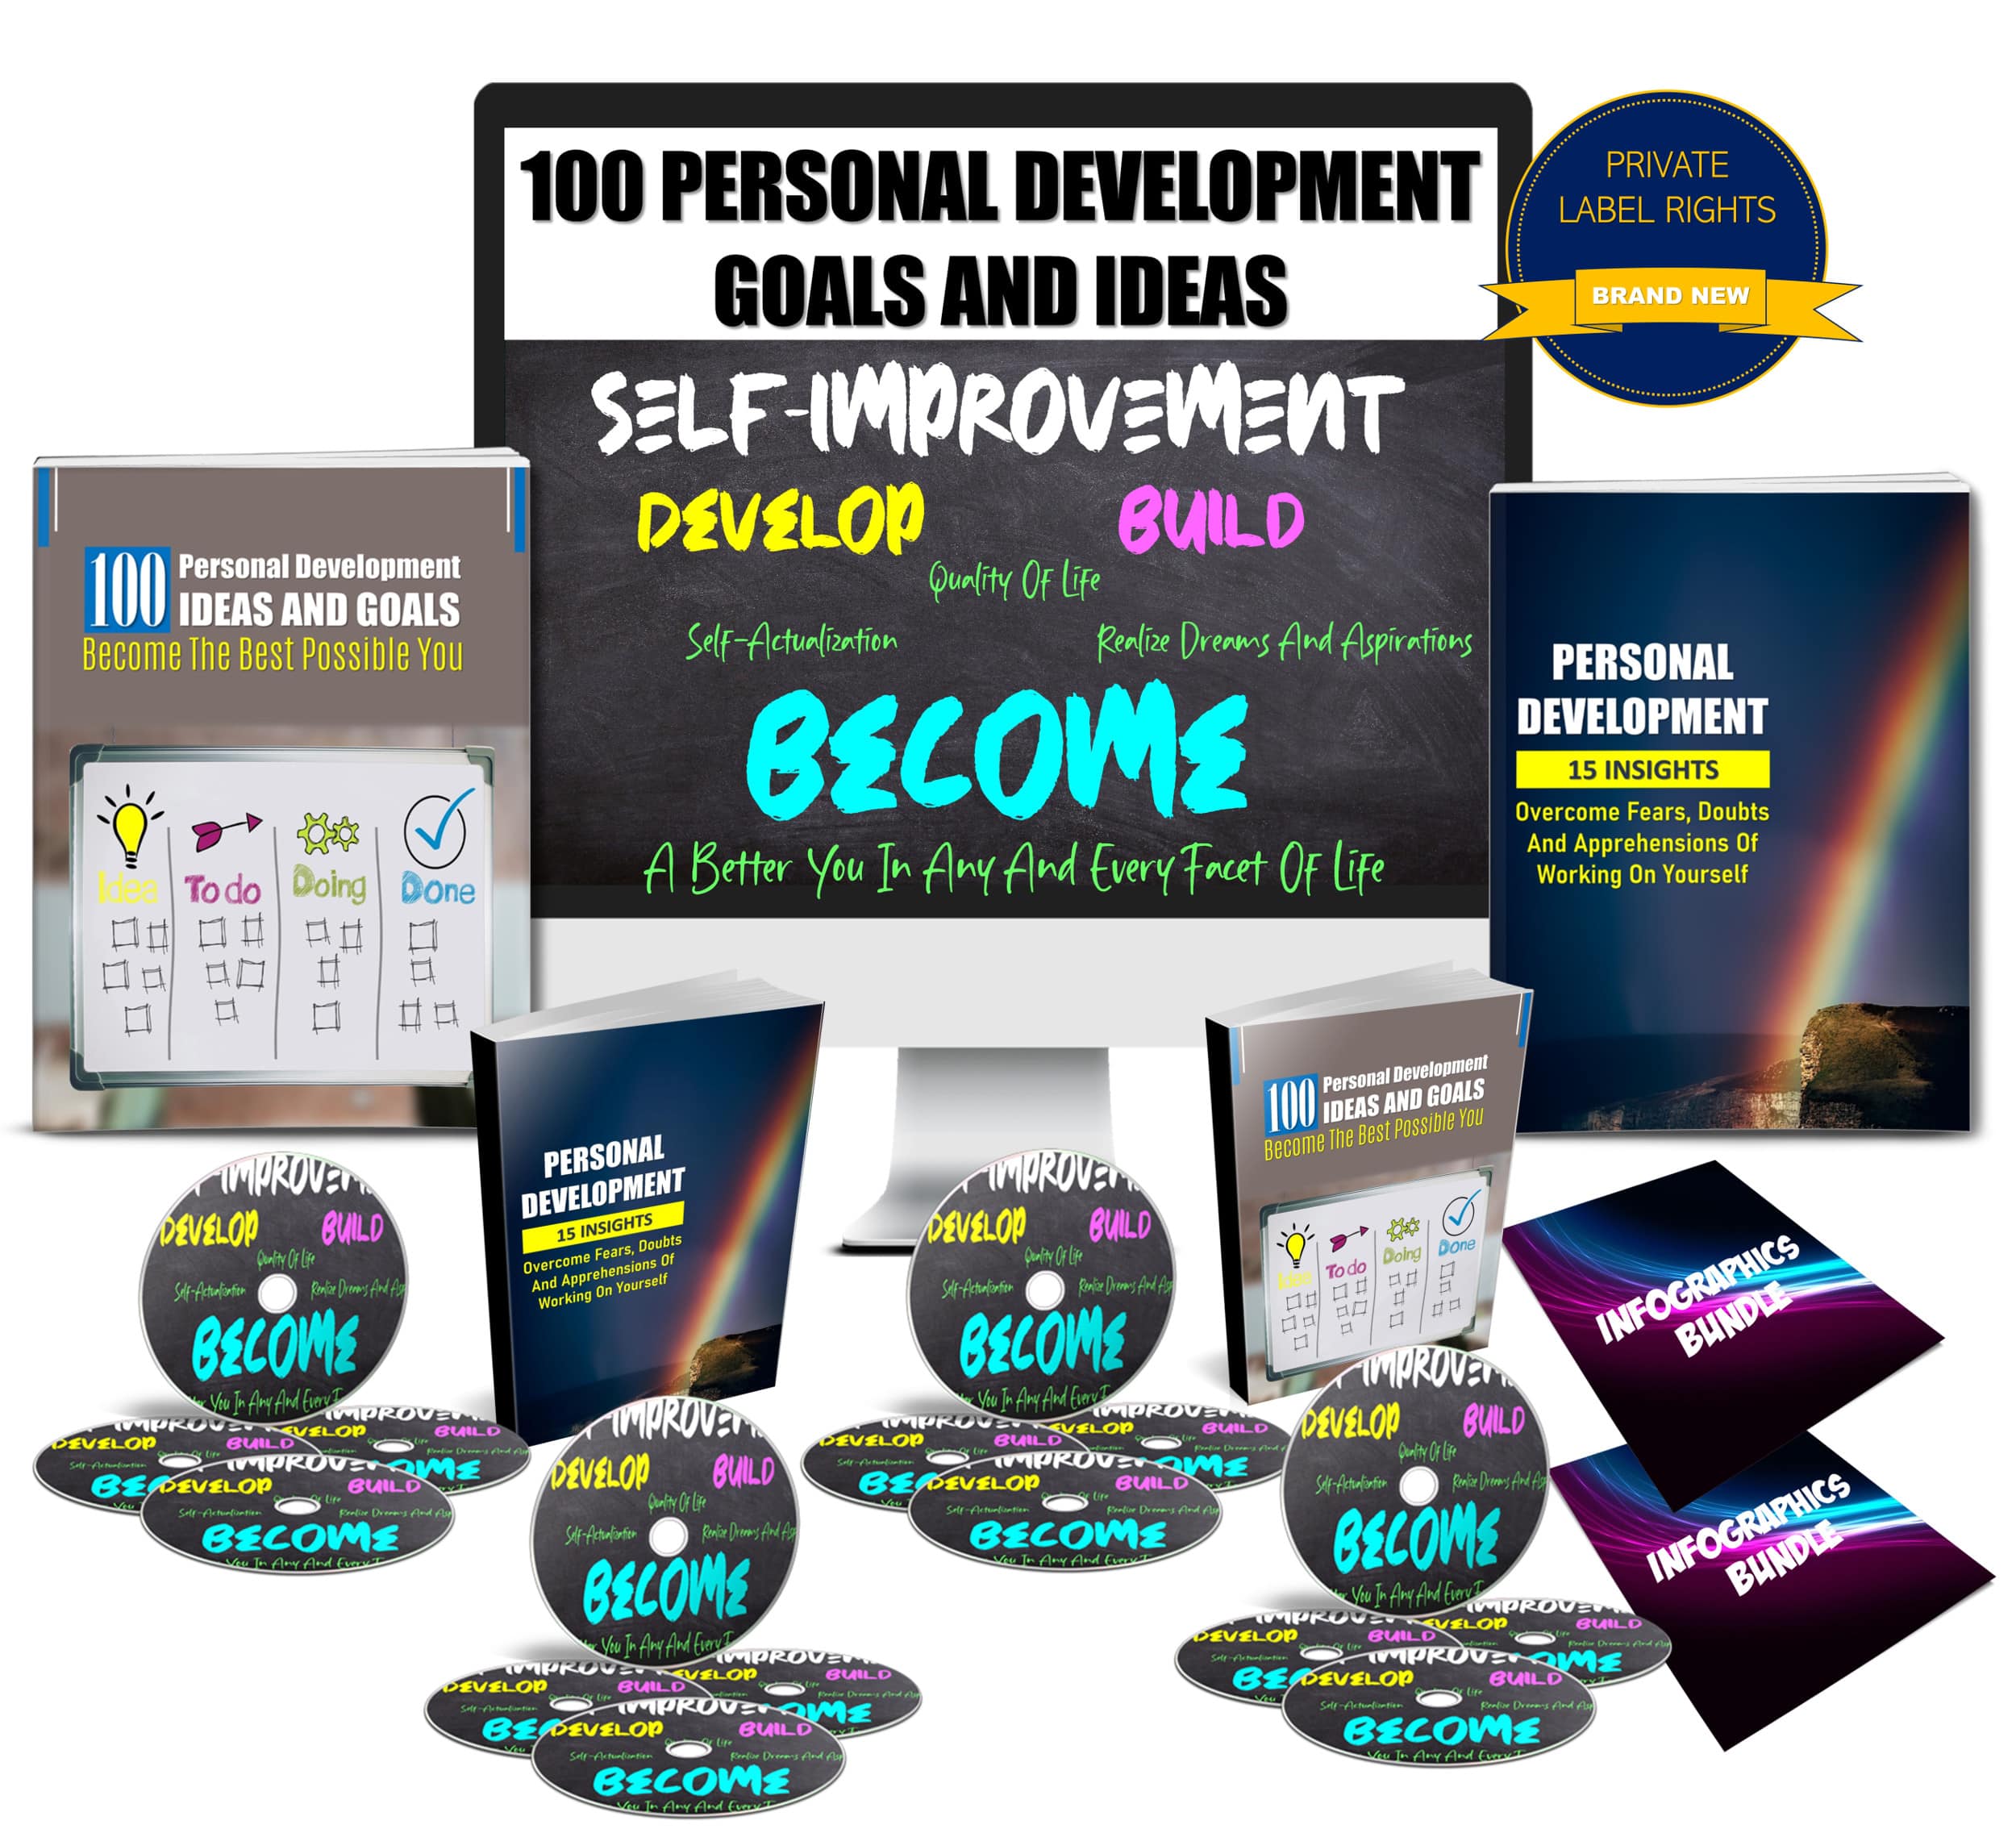 100 Personal Development Goals And Ideas Content Pack With PLR Rights